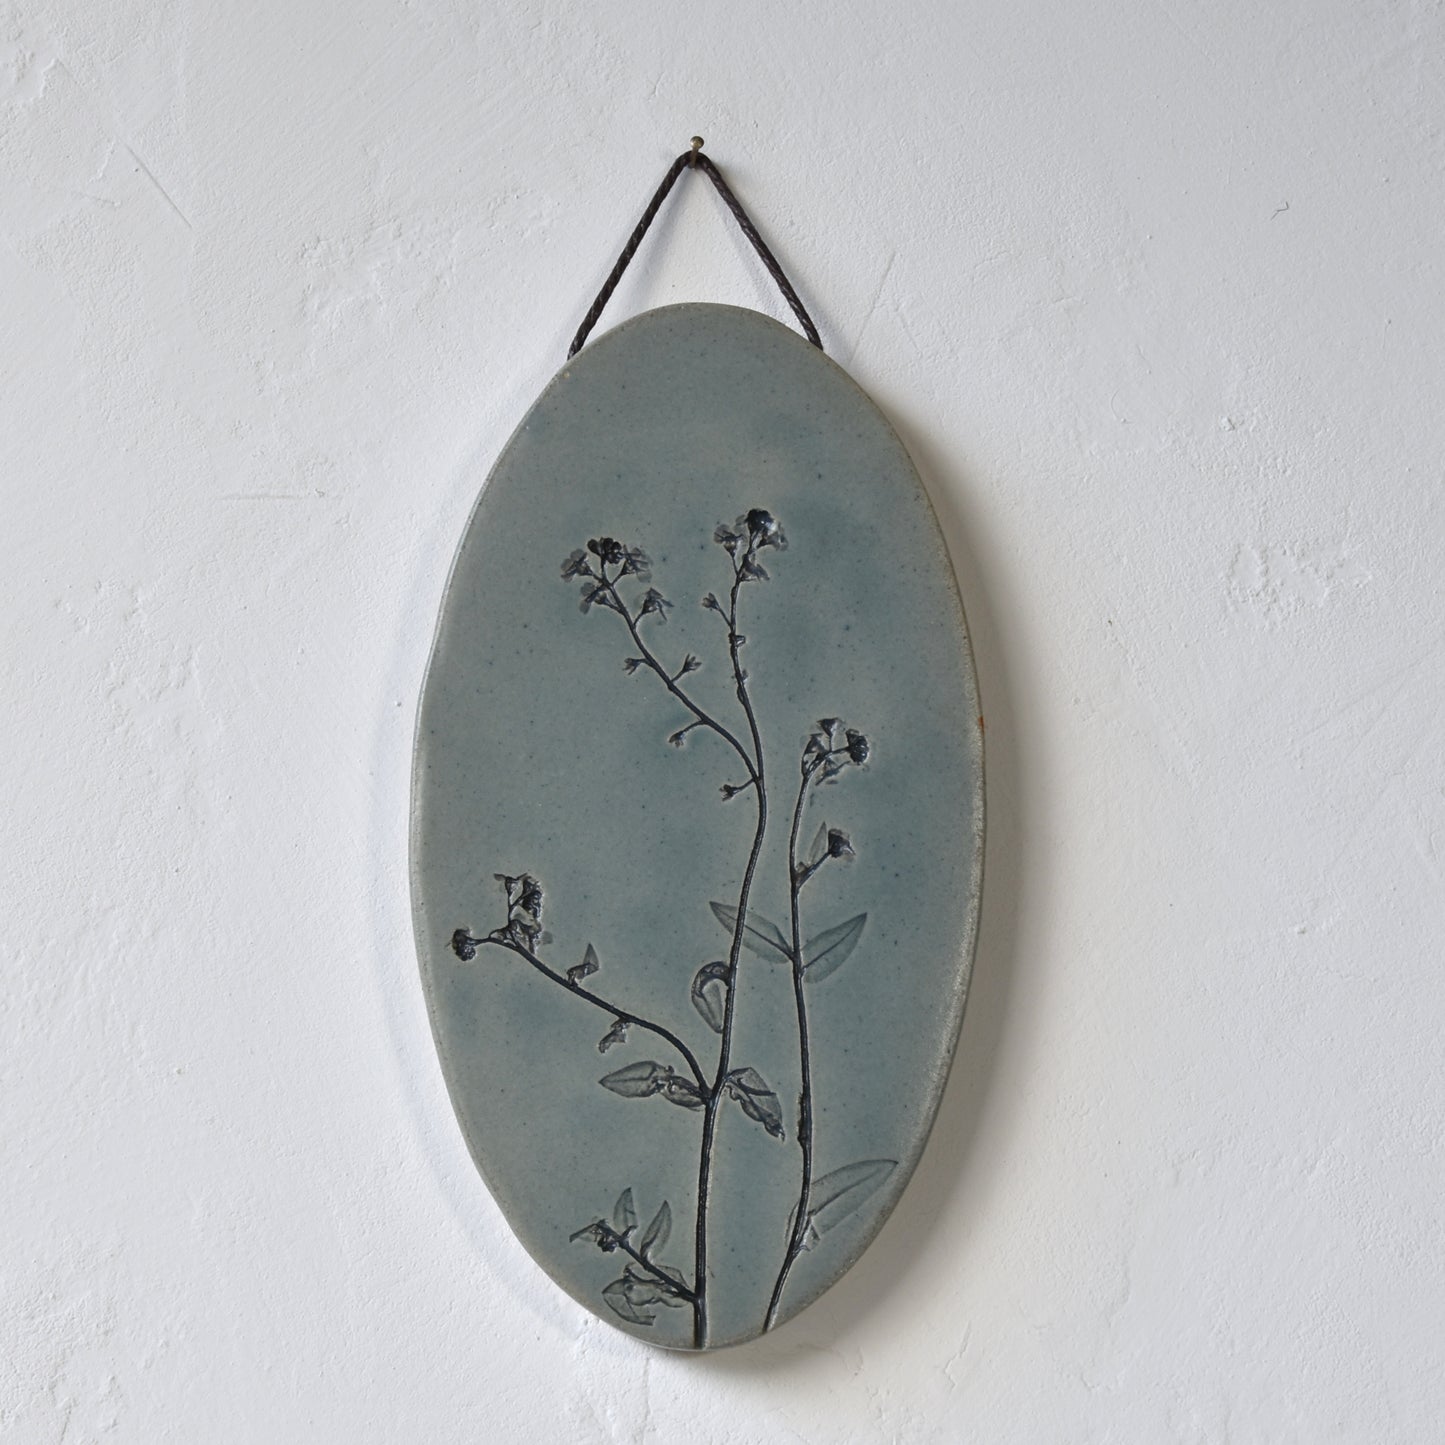 7.75" Forget-me-not Wall Hanging in Denim Blue